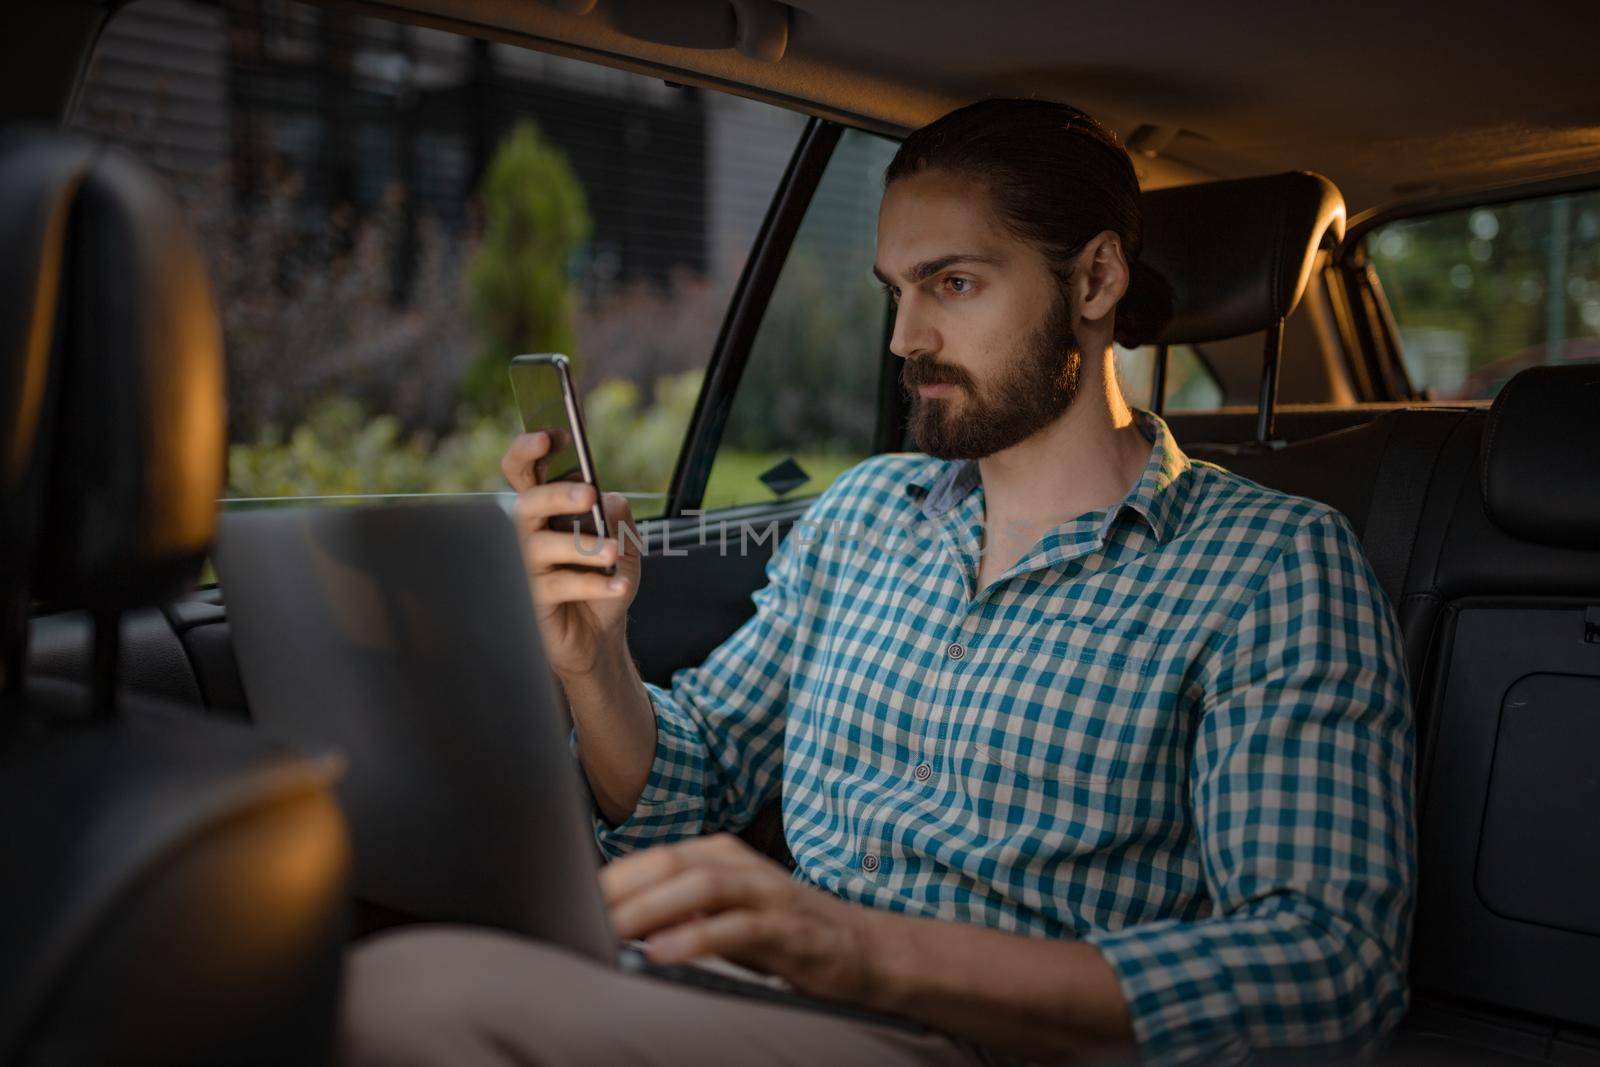 Young confident businessman is holding smartphone in his hand and texting on the back seat in car.